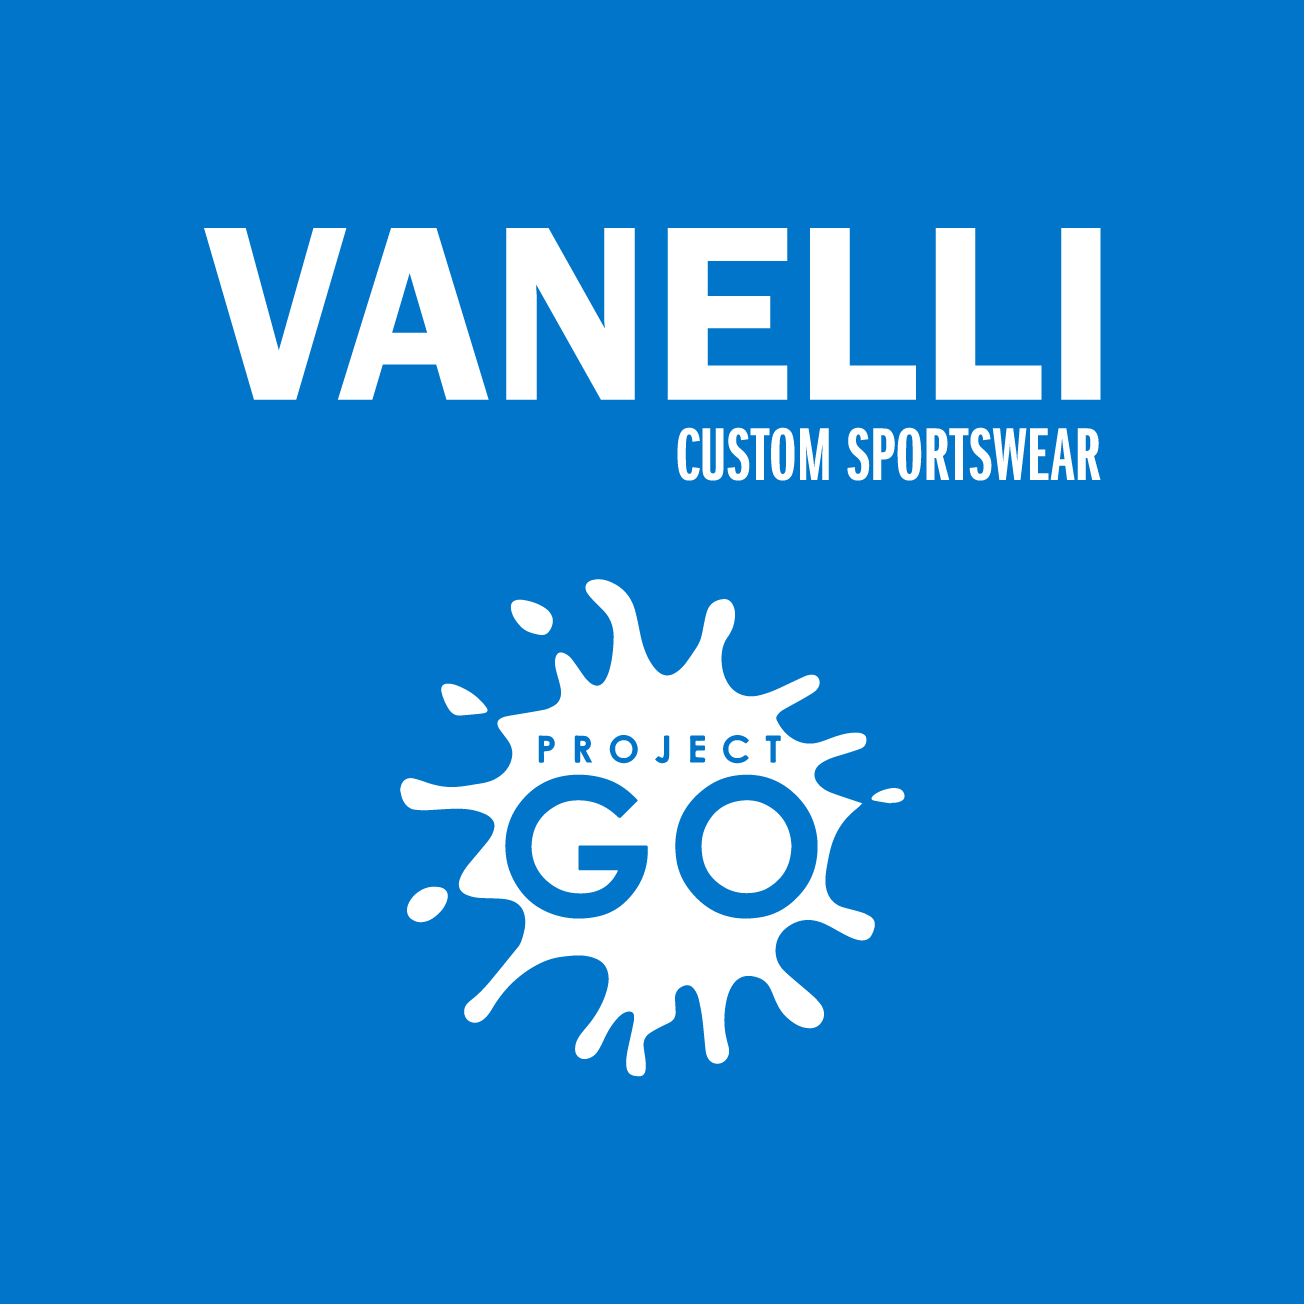 Club Image for VANELLI-PROJECT GO